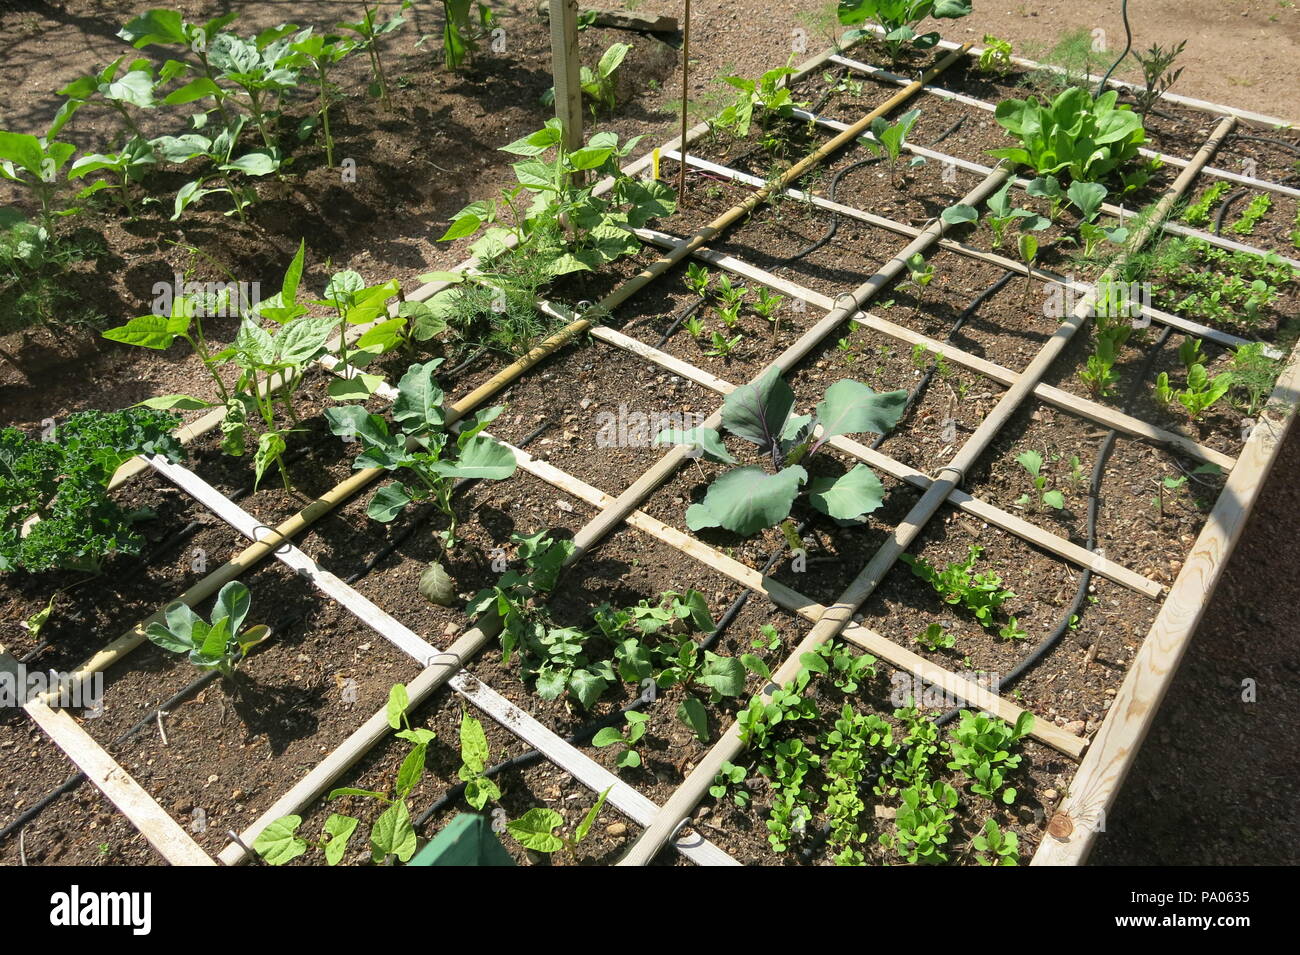 A simple wooden grid of 32 squares provides the framework for the opportunity to grow a variety of herbs and vegetables in a small garden plot Stock Photo